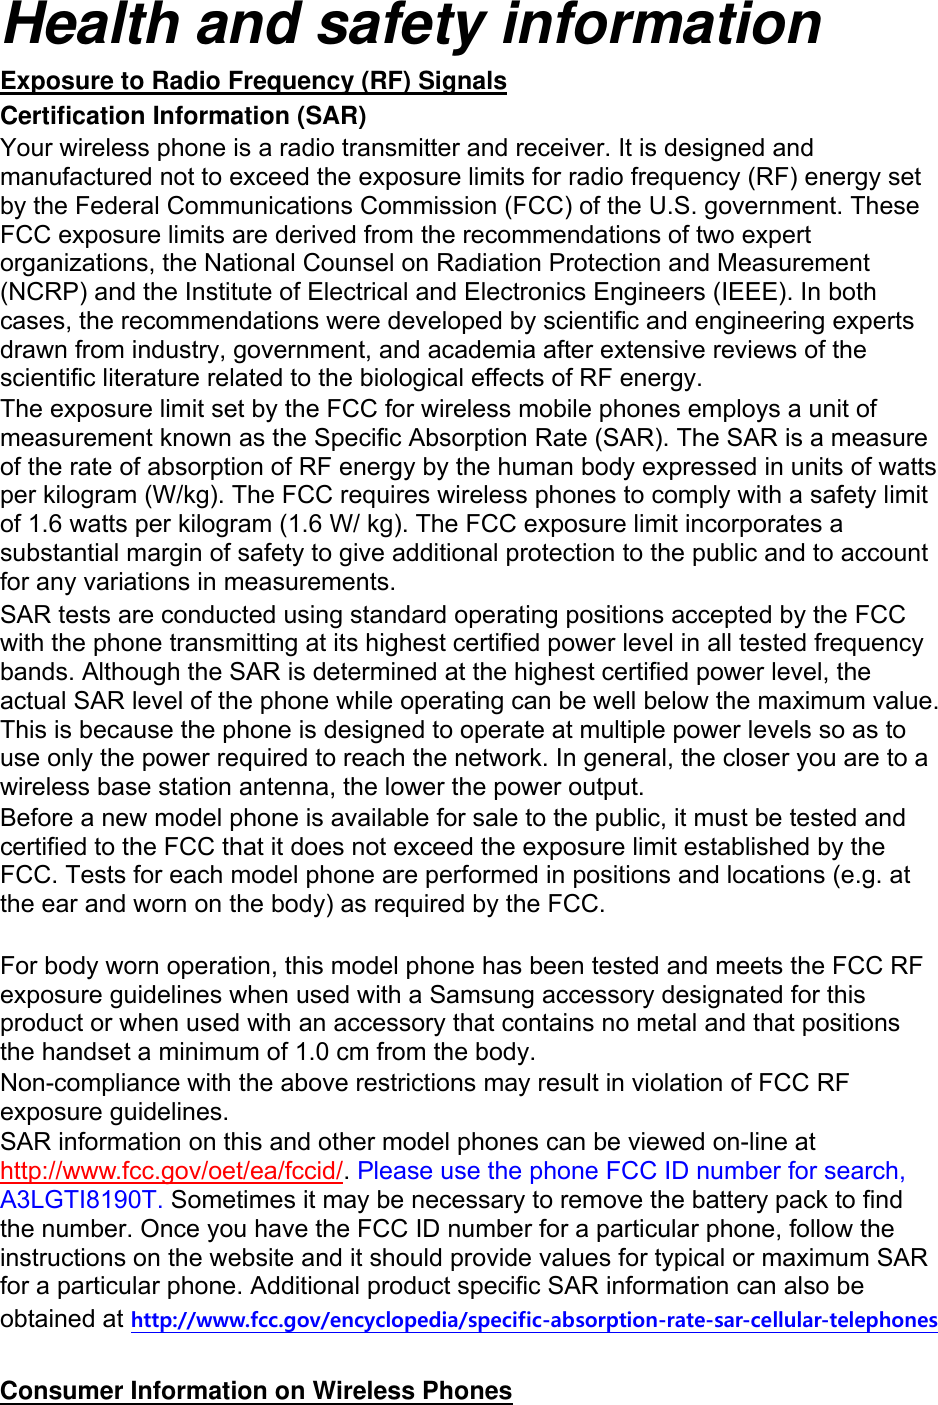 Health and safety information Exposure to Radio Frequency (RF) Signals Certification Information (SAR) Your wireless phone is a radio transmitter and receiver. It is designed and manufactured not to exceed the exposure limits for radio frequency (RF) energy set by the Federal Communications Commission (FCC) of the U.S. government. These FCC exposure limits are derived from the recommendations of two expert organizations, the National Counsel on Radiation Protection and Measurement (NCRP) and the Institute of Electrical and Electronics Engineers (IEEE). In both cases, the recommendations were developed by scientific and engineering experts drawn from industry, government, and academia after extensive reviews of the scientific literature related to the biological effects of RF energy. The exposure limit set by the FCC for wireless mobile phones employs a unit of measurement known as the Specific Absorption Rate (SAR). The SAR is a measure of the rate of absorption of RF energy by the human body expressed in units of watts per kilogram (W/kg). The FCC requires wireless phones to comply with a safety limit of 1.6 watts per kilogram (1.6 W/ kg). The FCC exposure limit incorporates a substantial margin of safety to give additional protection to the public and to account for any variations in measurements. SAR tests are conducted using standard operating positions accepted by the FCC with the phone transmitting at its highest certified power level in all tested frequency bands. Although the SAR is determined at the highest certified power level, the actual SAR level of the phone while operating can be well below the maximum value. This is because the phone is designed to operate at multiple power levels so as to use only the power required to reach the network. In general, the closer you are to a wireless base station antenna, the lower the power output. Before a new model phone is available for sale to the public, it must be tested and certified to the FCC that it does not exceed the exposure limit established by the FCC. Tests for each model phone are performed in positions and locations (e.g. at the ear and worn on the body) as required by the FCC.      For body worn operation, this model phone has been tested and meets the FCC RF exposure guidelines when used with a Samsung accessory designated for this product or when used with an accessory that contains no metal and that positions the handset a minimum of 1.0 cm from the body.   Non-compliance with the above restrictions may result in violation of FCC RF exposure guidelines. SAR information on this and other model phones can be viewed on-line at http://www.fcc.gov/oet/ea/fccid/. Please use the phone FCC ID number for search, A3LGTI8190T. Sometimes it may be necessary to remove the battery pack to find the number. Once you have the FCC ID number for a particular phone, follow the instructions on the website and it should provide values for typical or maximum SAR for a particular phone. Additional product specific SAR information can also be obtained at http://www.fcc.gov/encyclopedia/specific-absorption-rate-sar-cellular-telephones  Consumer Information on Wireless Phones 